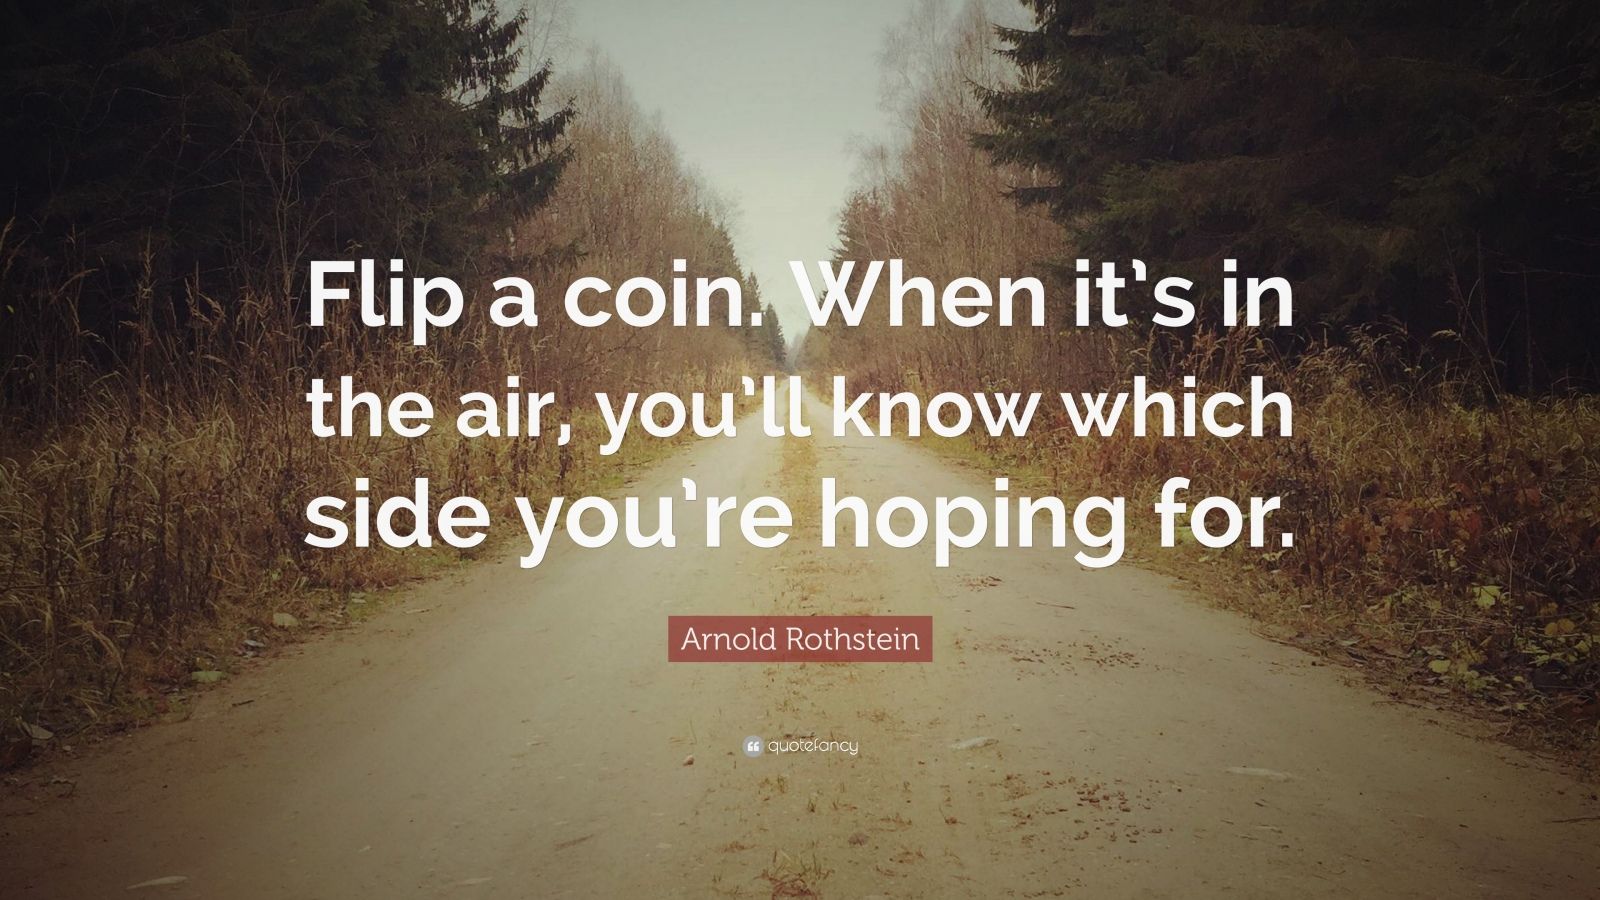 Arnold Rothstein Quote: “Flip a coin. When it’s in the air ...